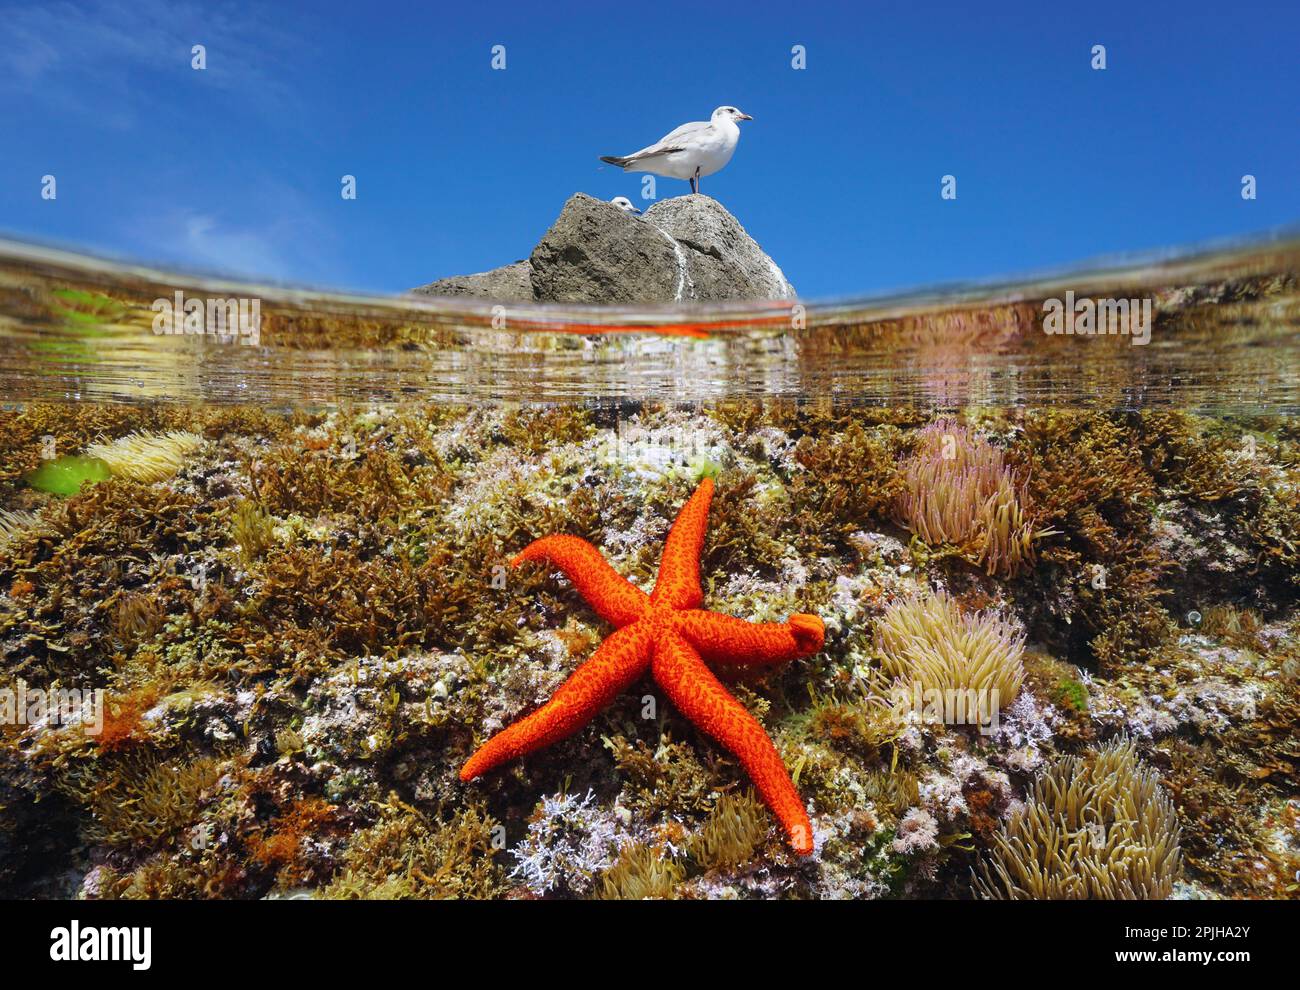 Sea star underwater and a gull bird on a rock with blue sky, Mediterranean sea, split level view over and under water surface, Spain Stock Photo